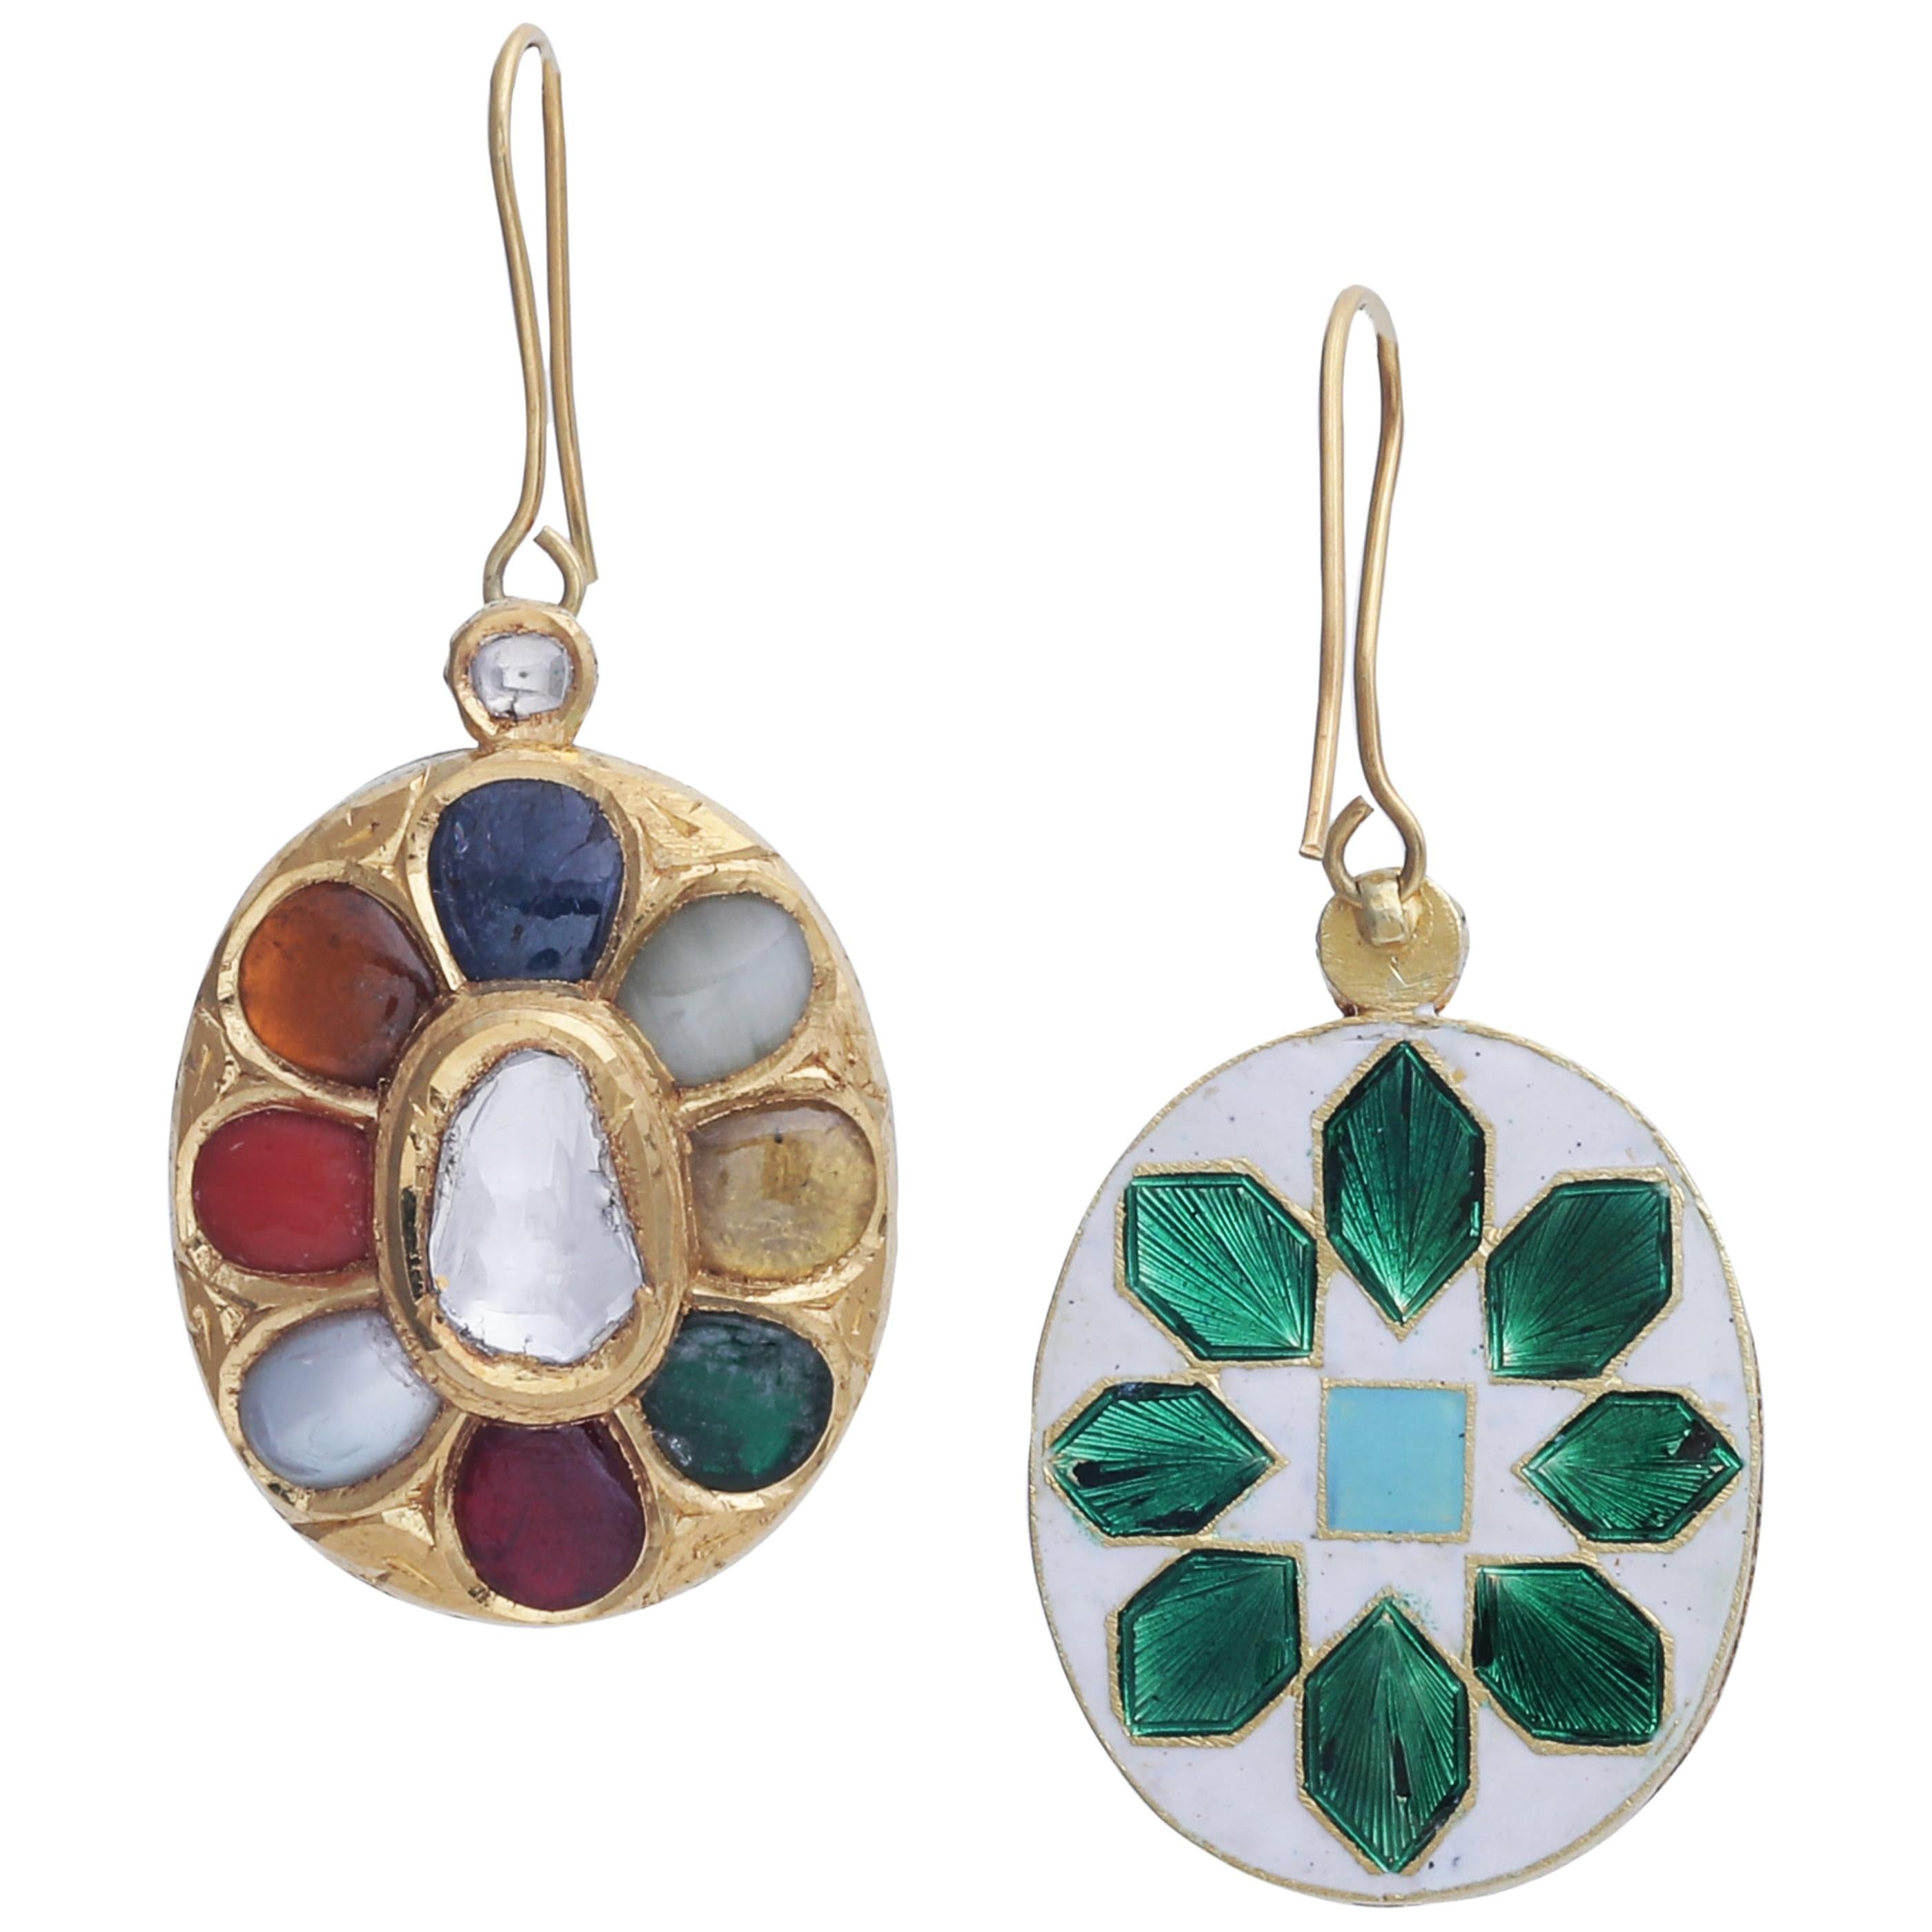 Hanging Earrings with Lucky Nine Gems Handcrafted in 22k Gold with Enamel Work For Sale